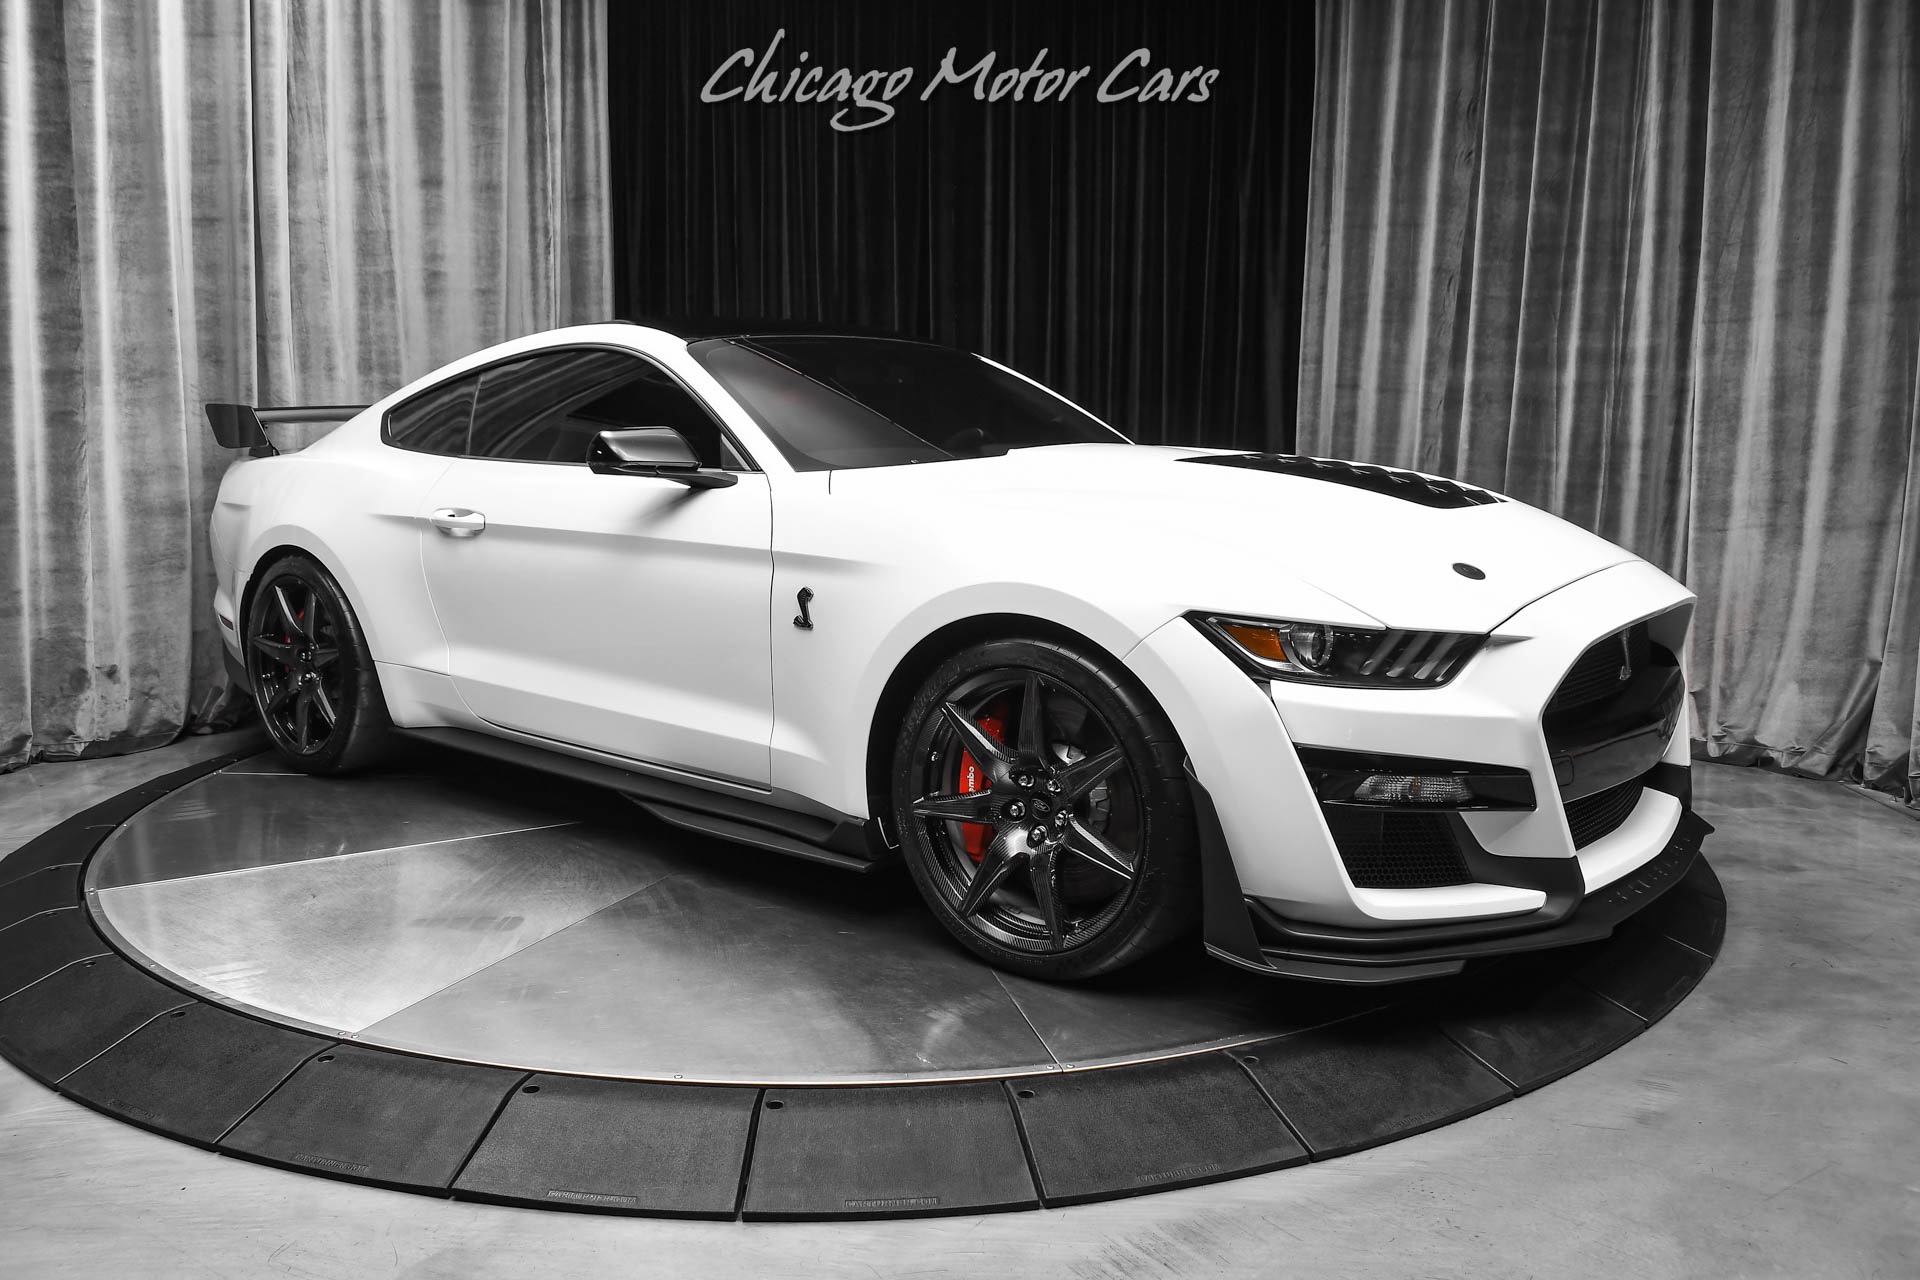 Used-2022-Ford-Mustang-Shelby-GT500-Carbon-Fiber-Track-Pack-Carbon-Fiber-Wheels-Tech-Pack-PPF